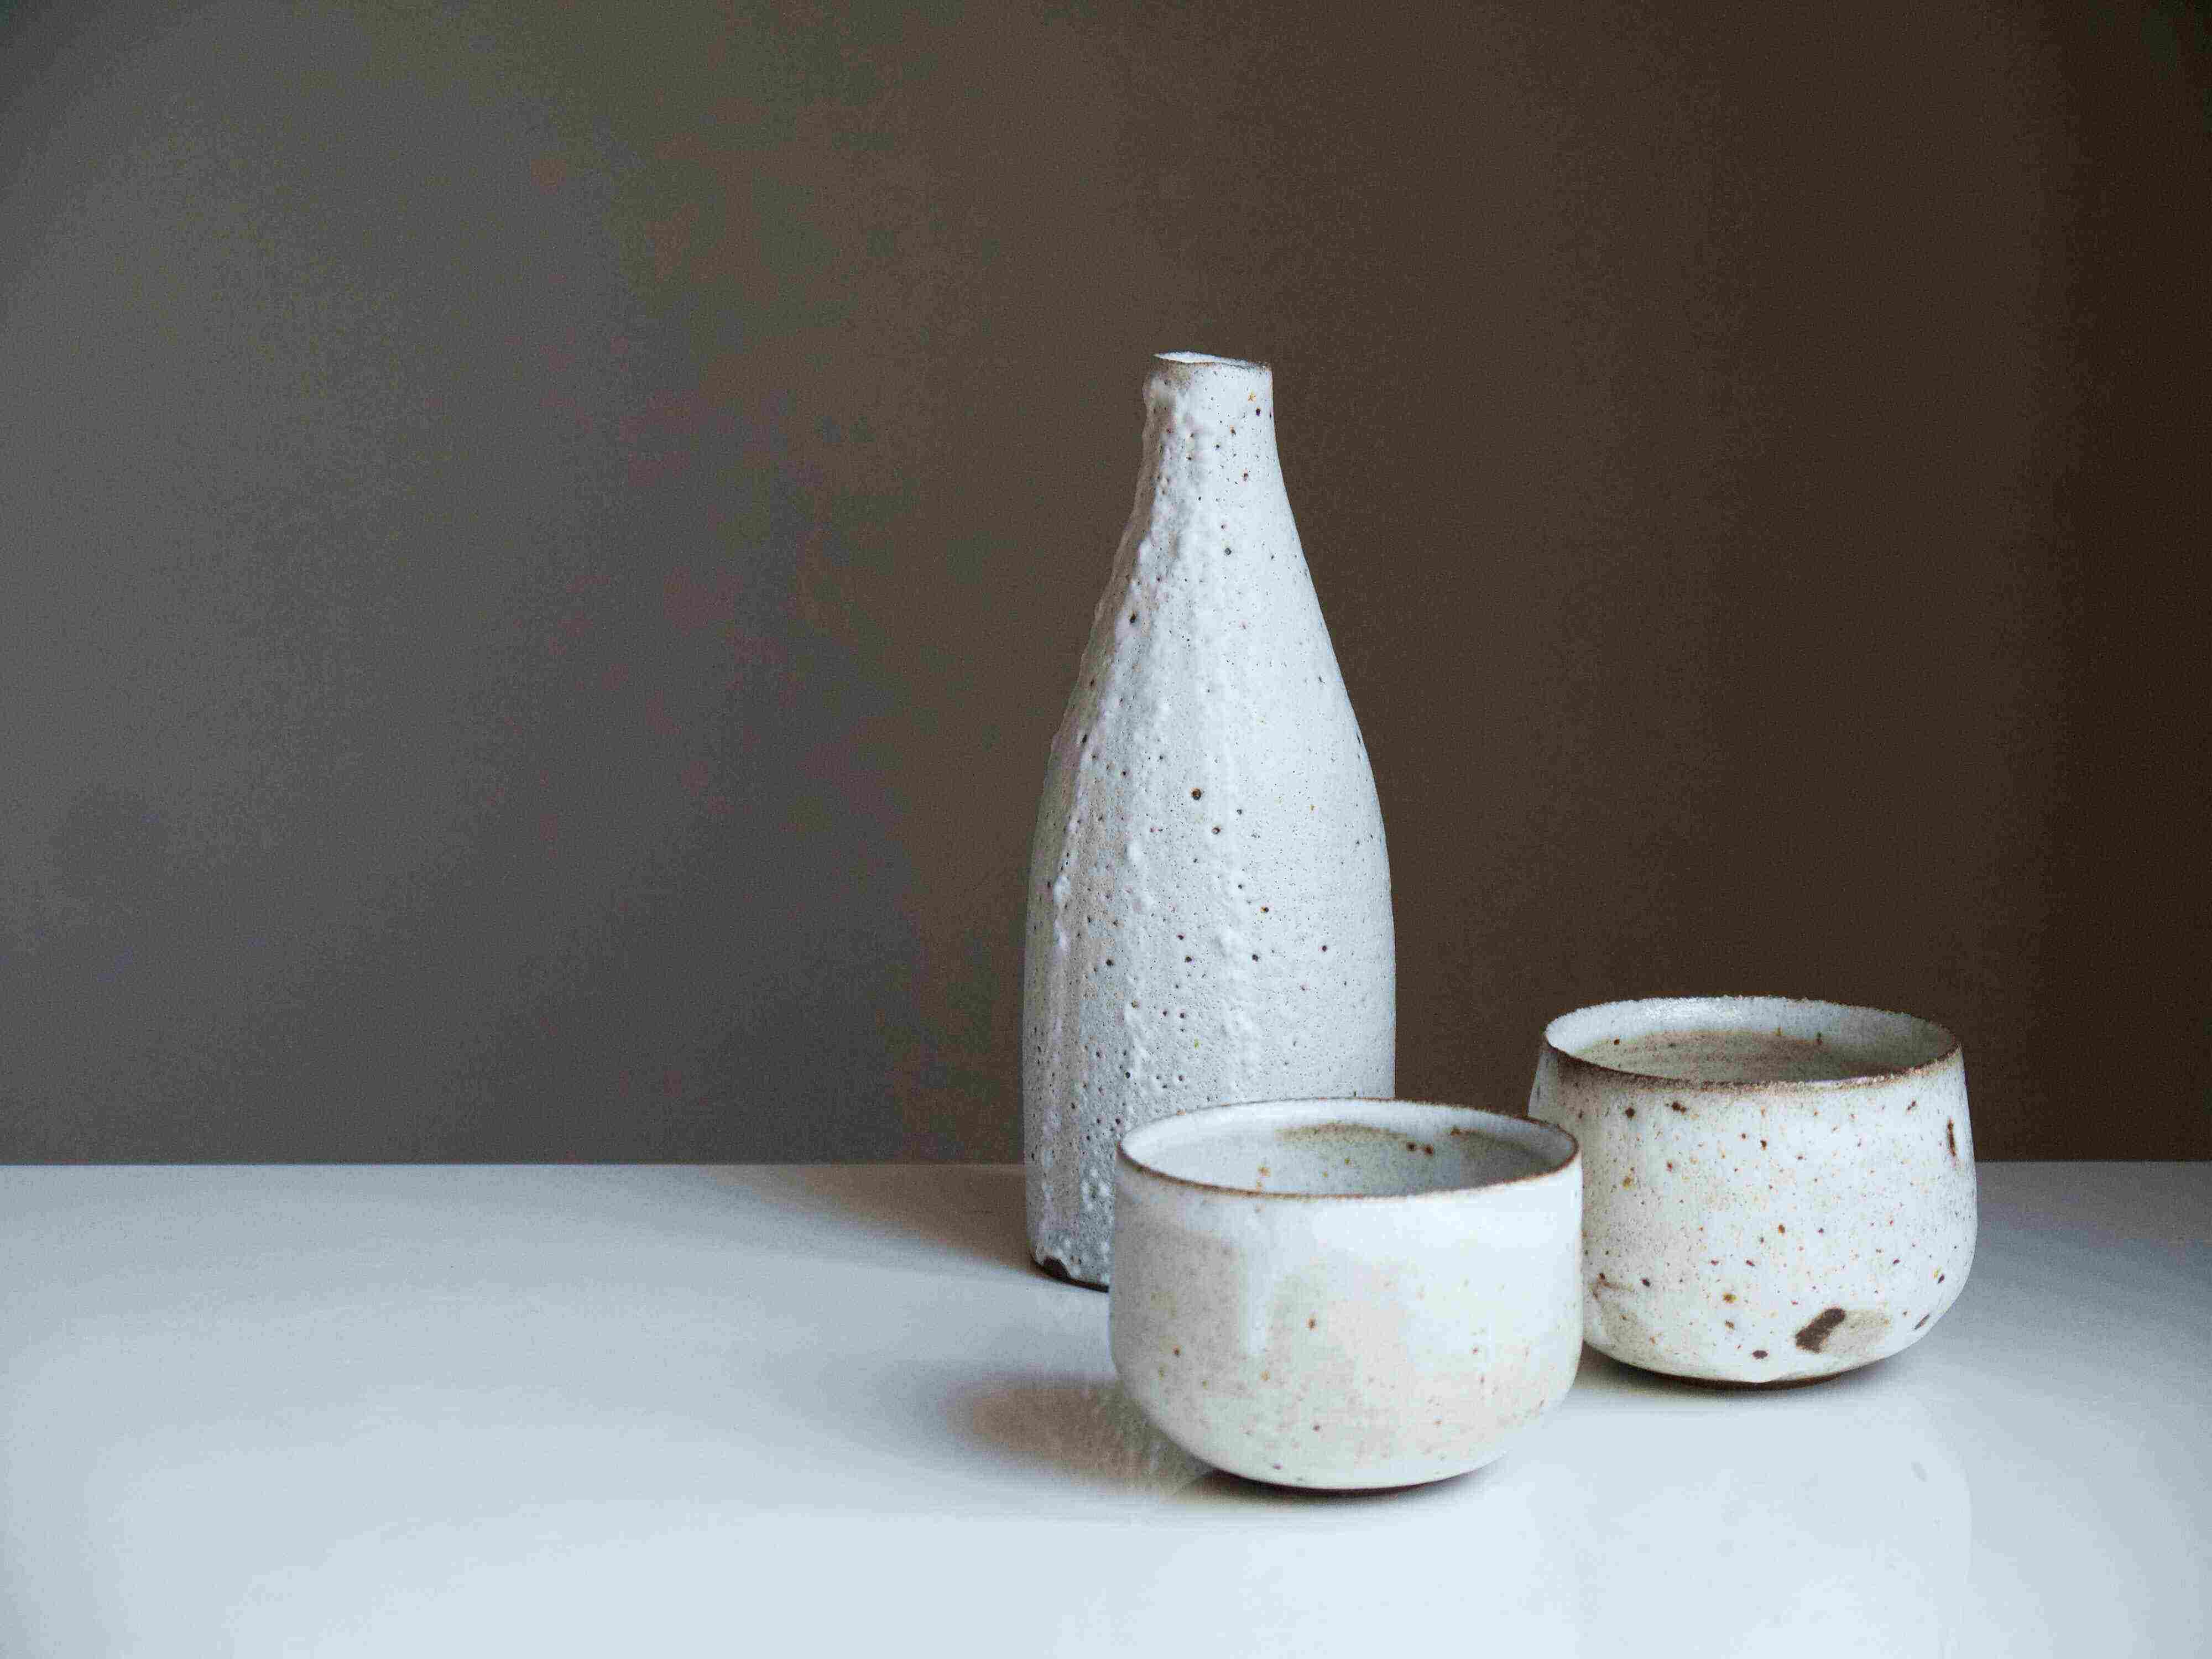 Three white stoneware offerings placed on a table